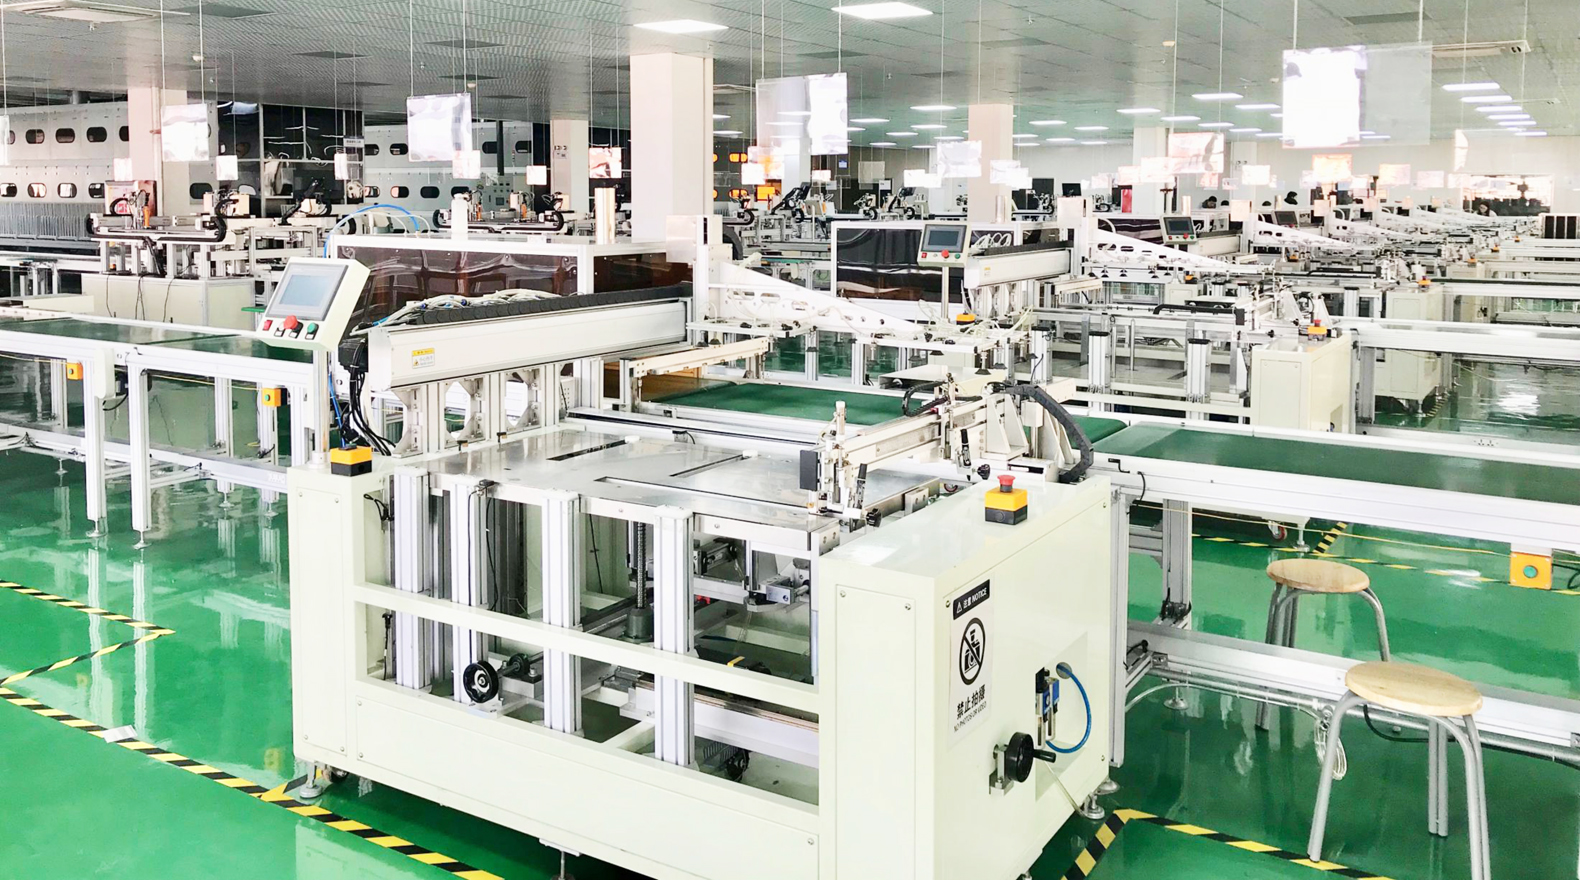 Automatic Assembling Lines